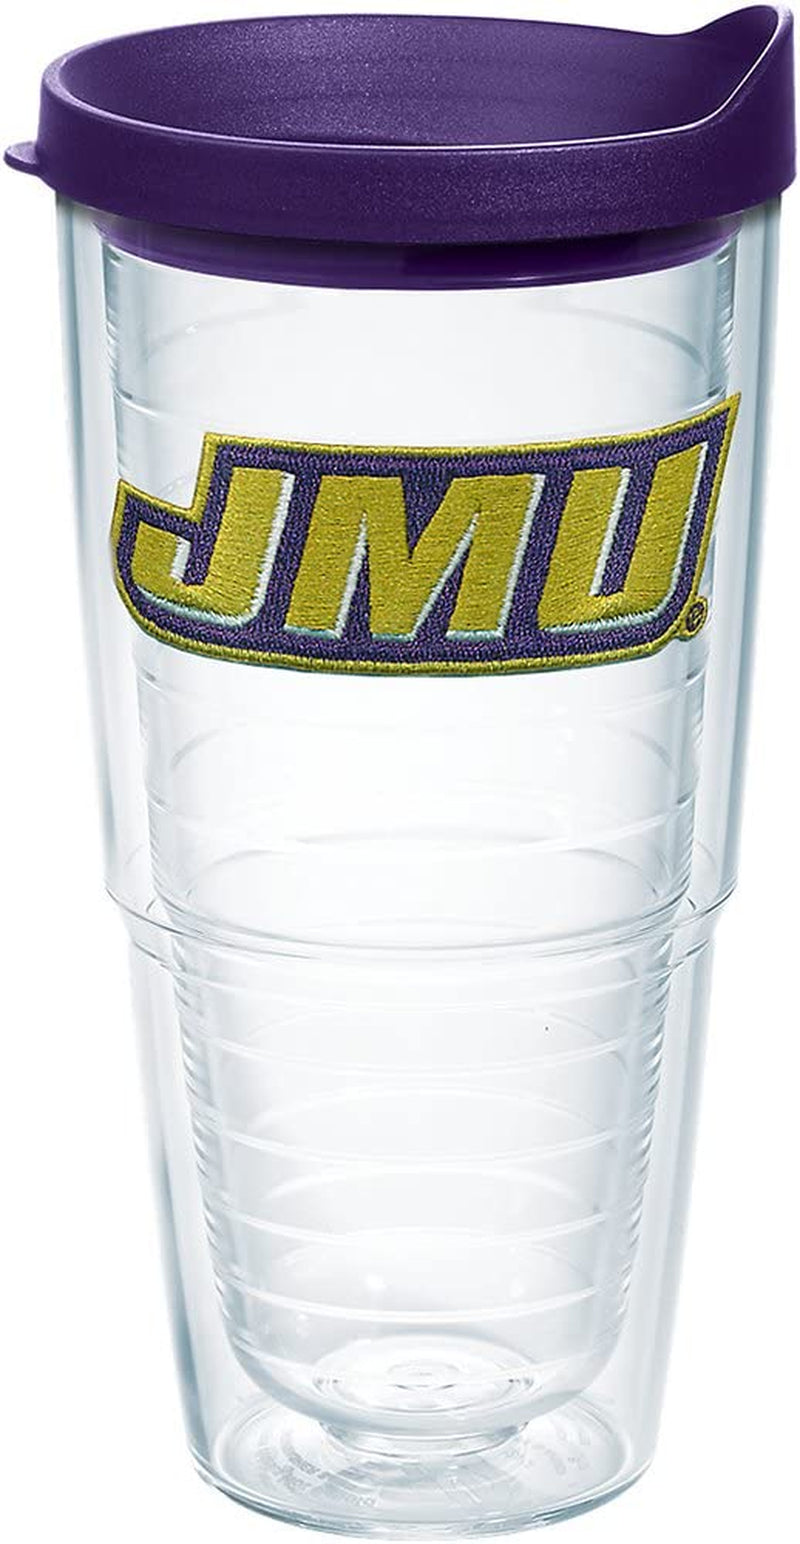 Tervis Made in USA Double Walled James Madison University JMU Dukes Insulated Tumbler Cup Keeps Drinks Cold & Hot, 24Oz - Black Lid, Primary Logo Home & Garden > Kitchen & Dining > Tableware > Drinkware Tervis Primary Logo 24oz 